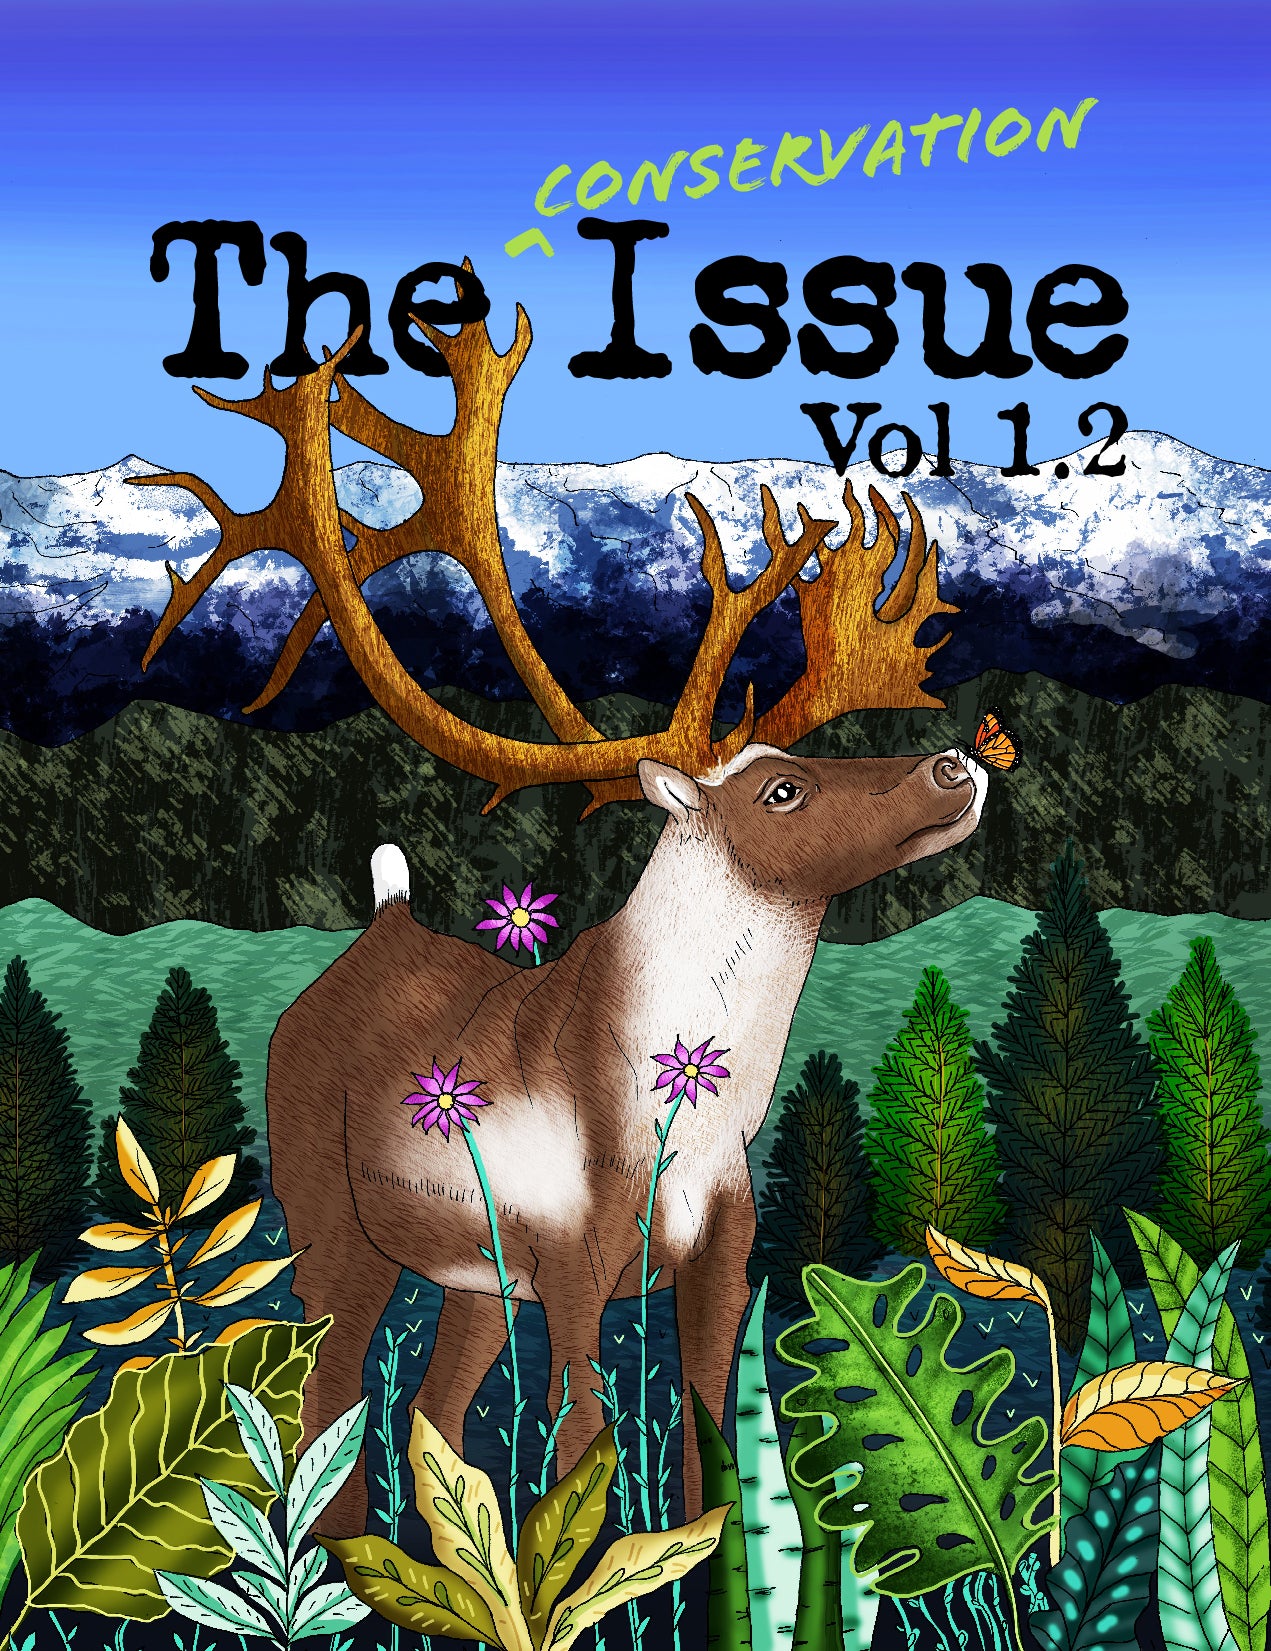 The Conservation Issue 1.2